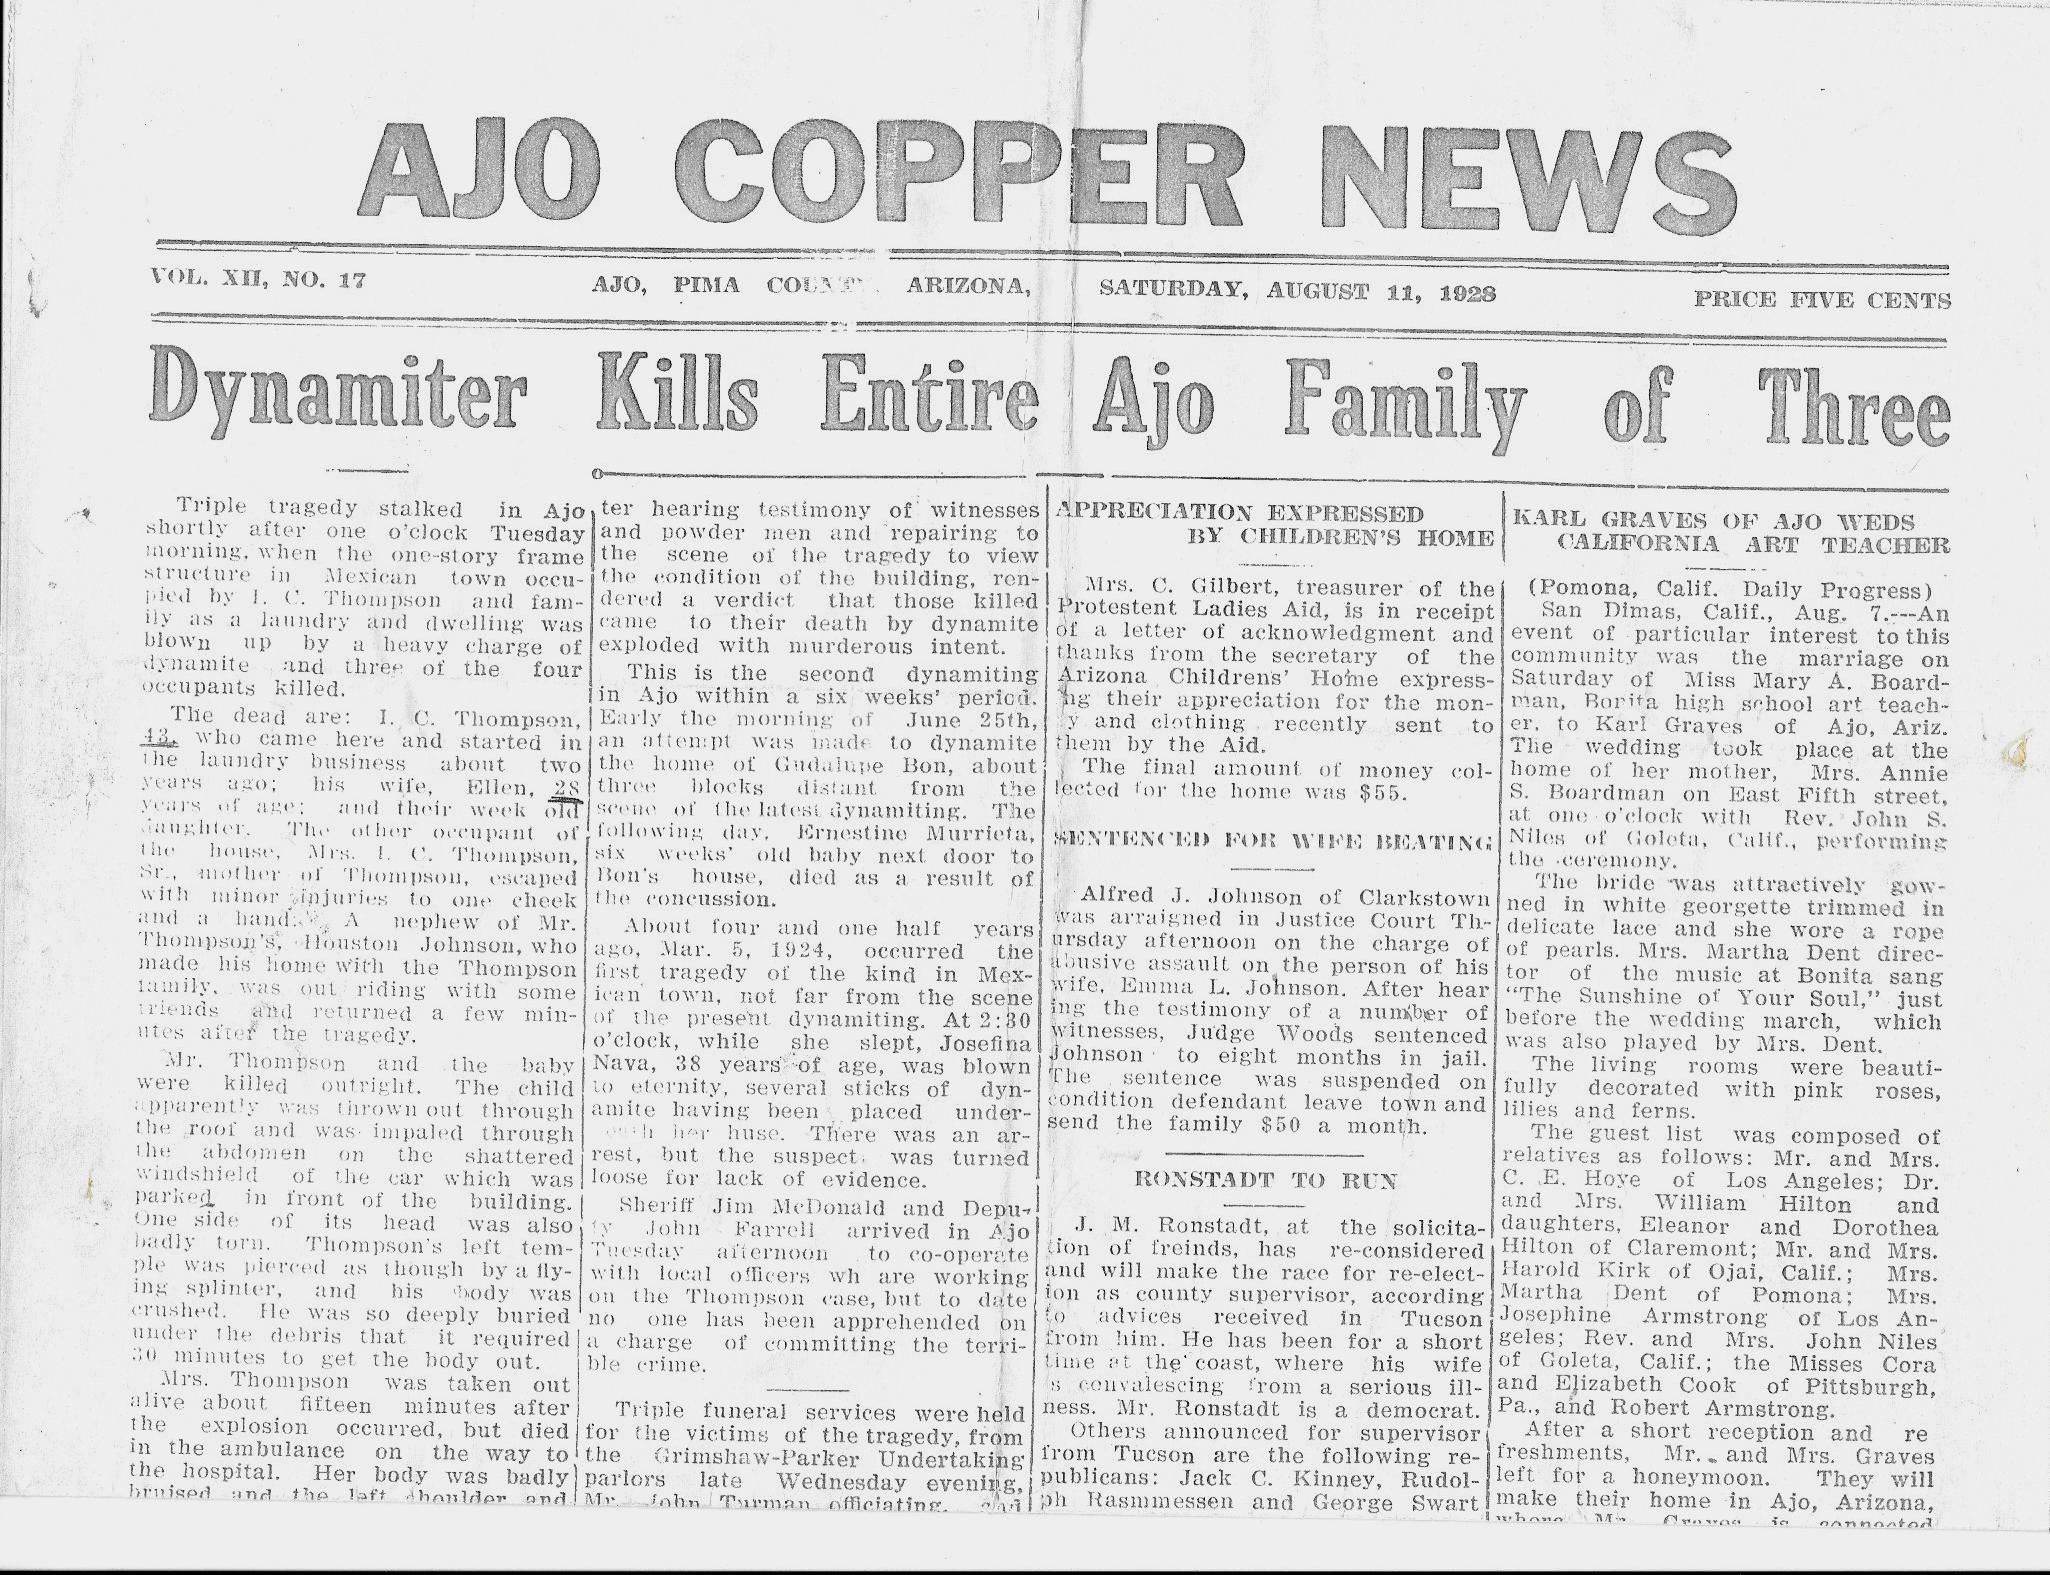 Article on the killing of the Thompson family by dynamite, part 1